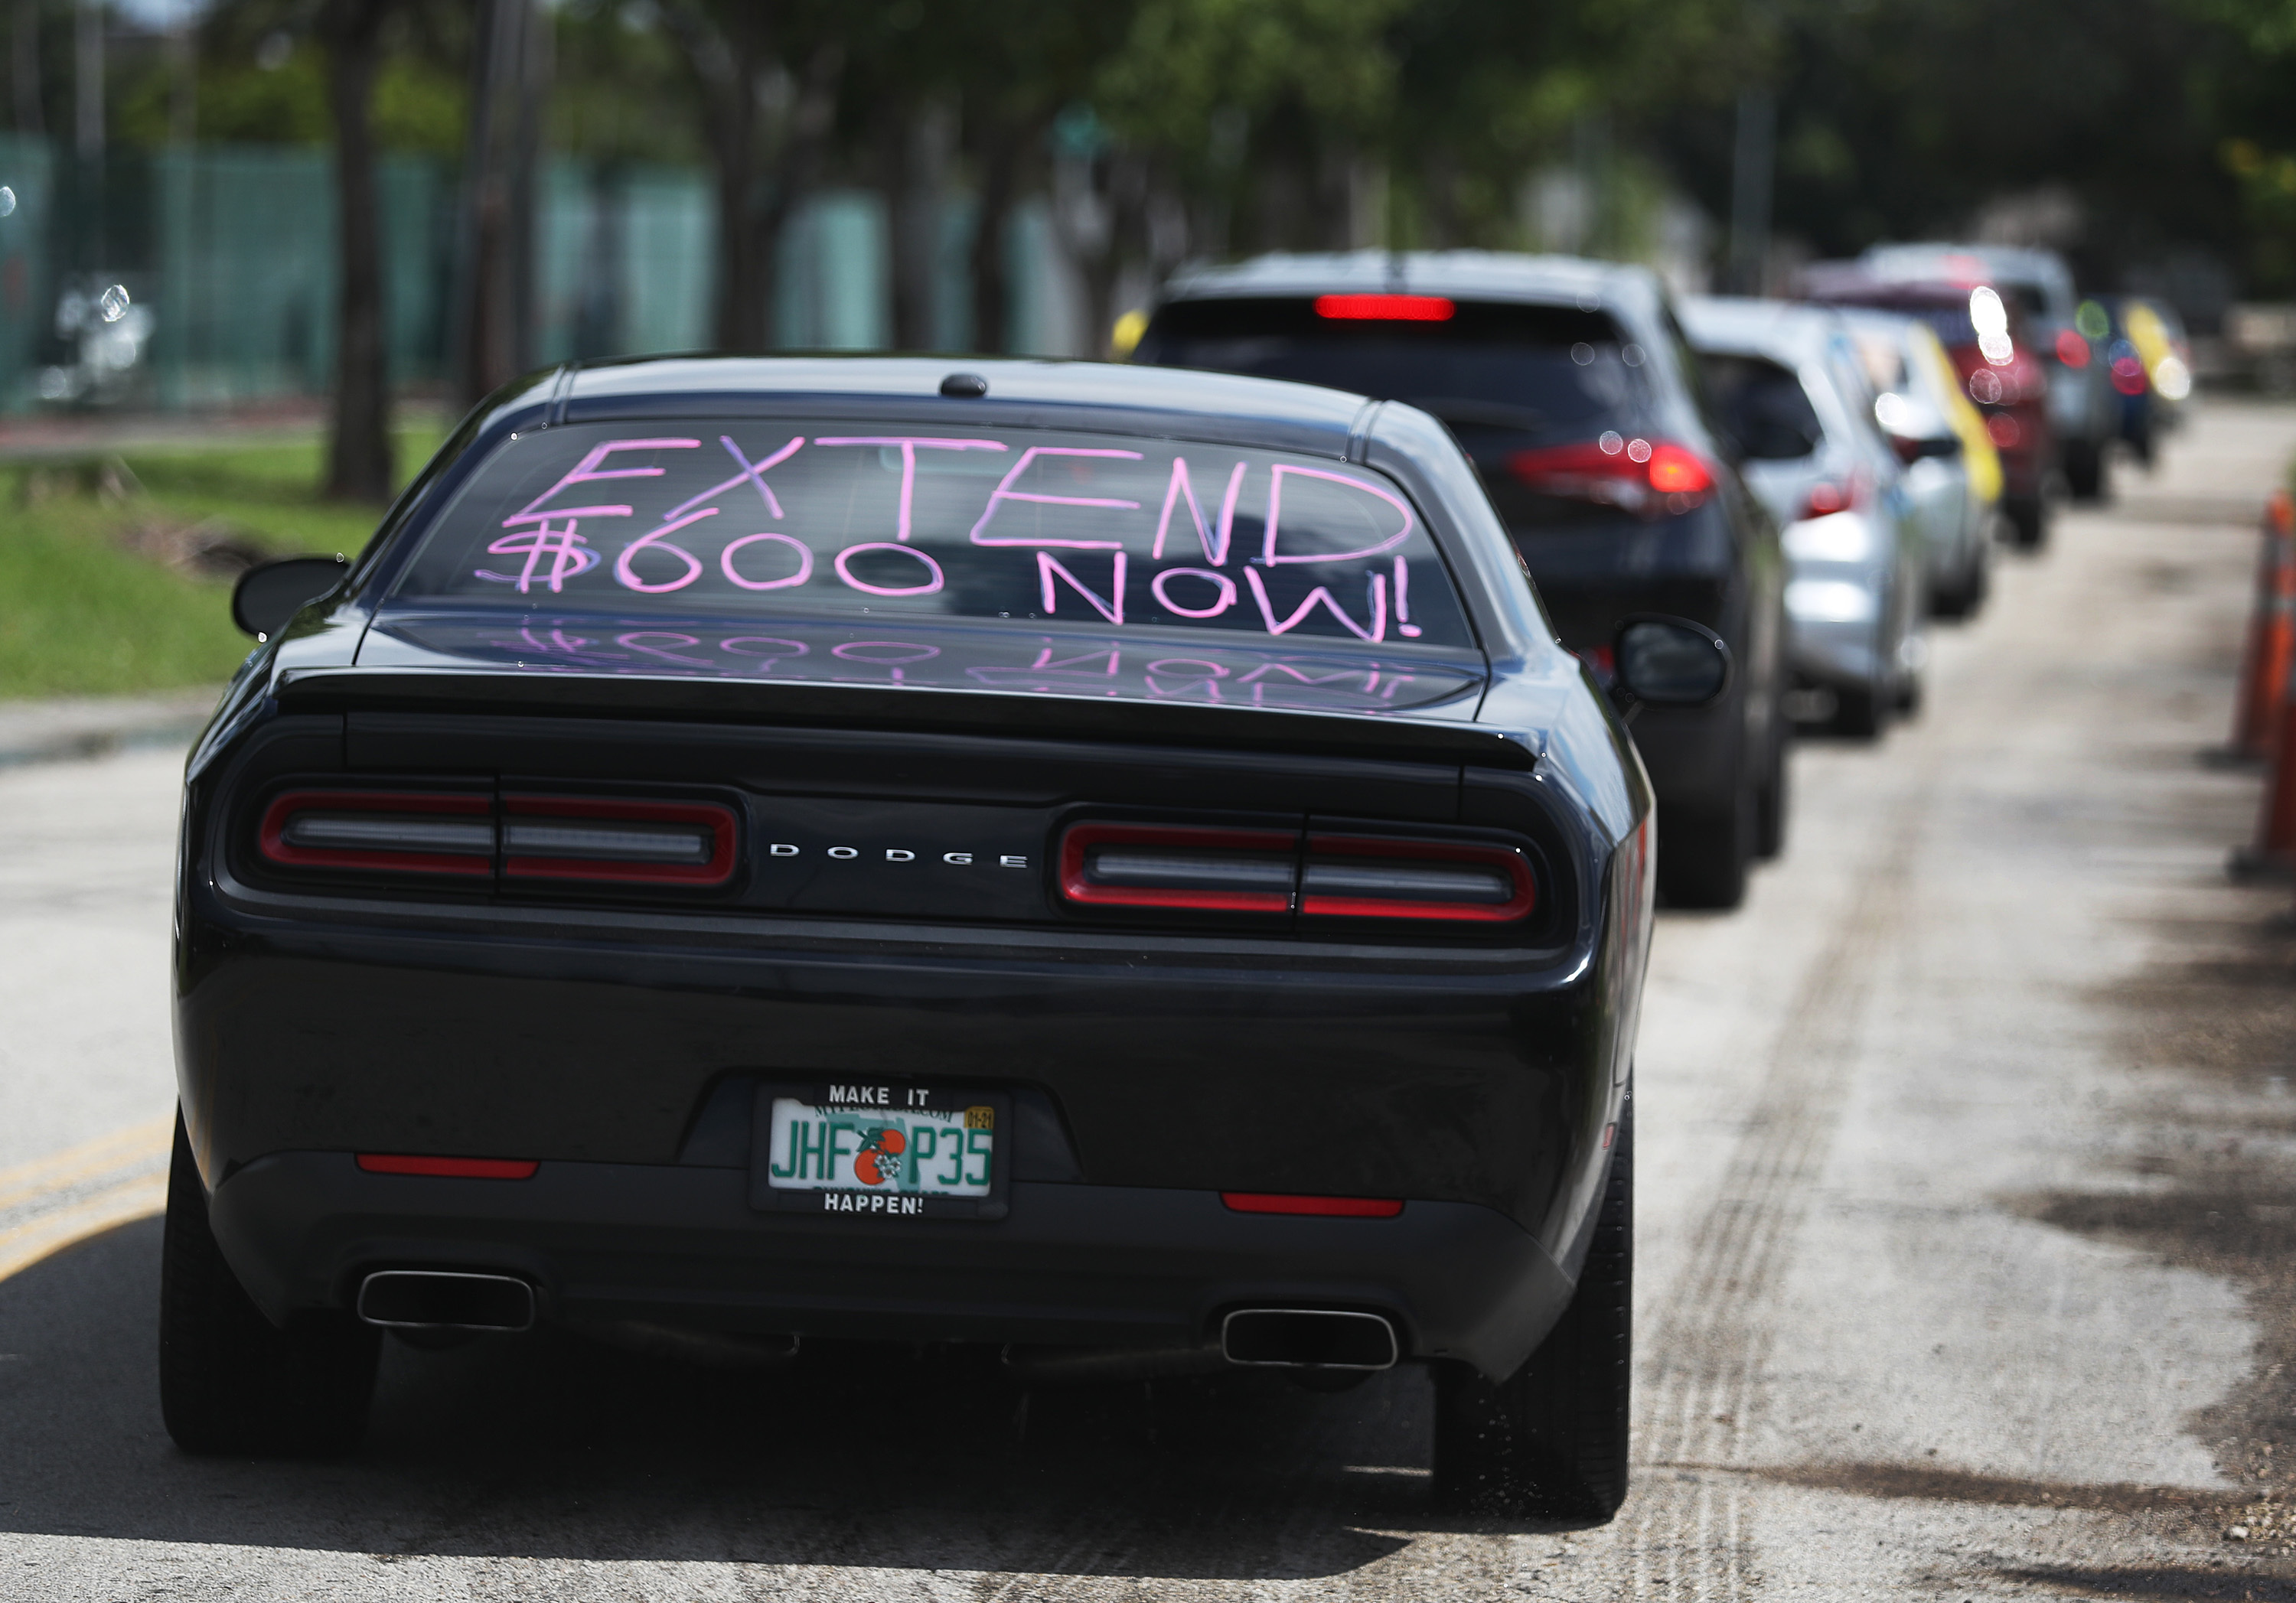 A car participates in a July 16, 2020 caravan protest headed for the Coral Gables, Florida, office of Sen. Rick Scott. Caravan participants asked Scott and other Senators to support extension of unemployment benefits for laid-off Americans. (Joe Raedle—Getty Images)